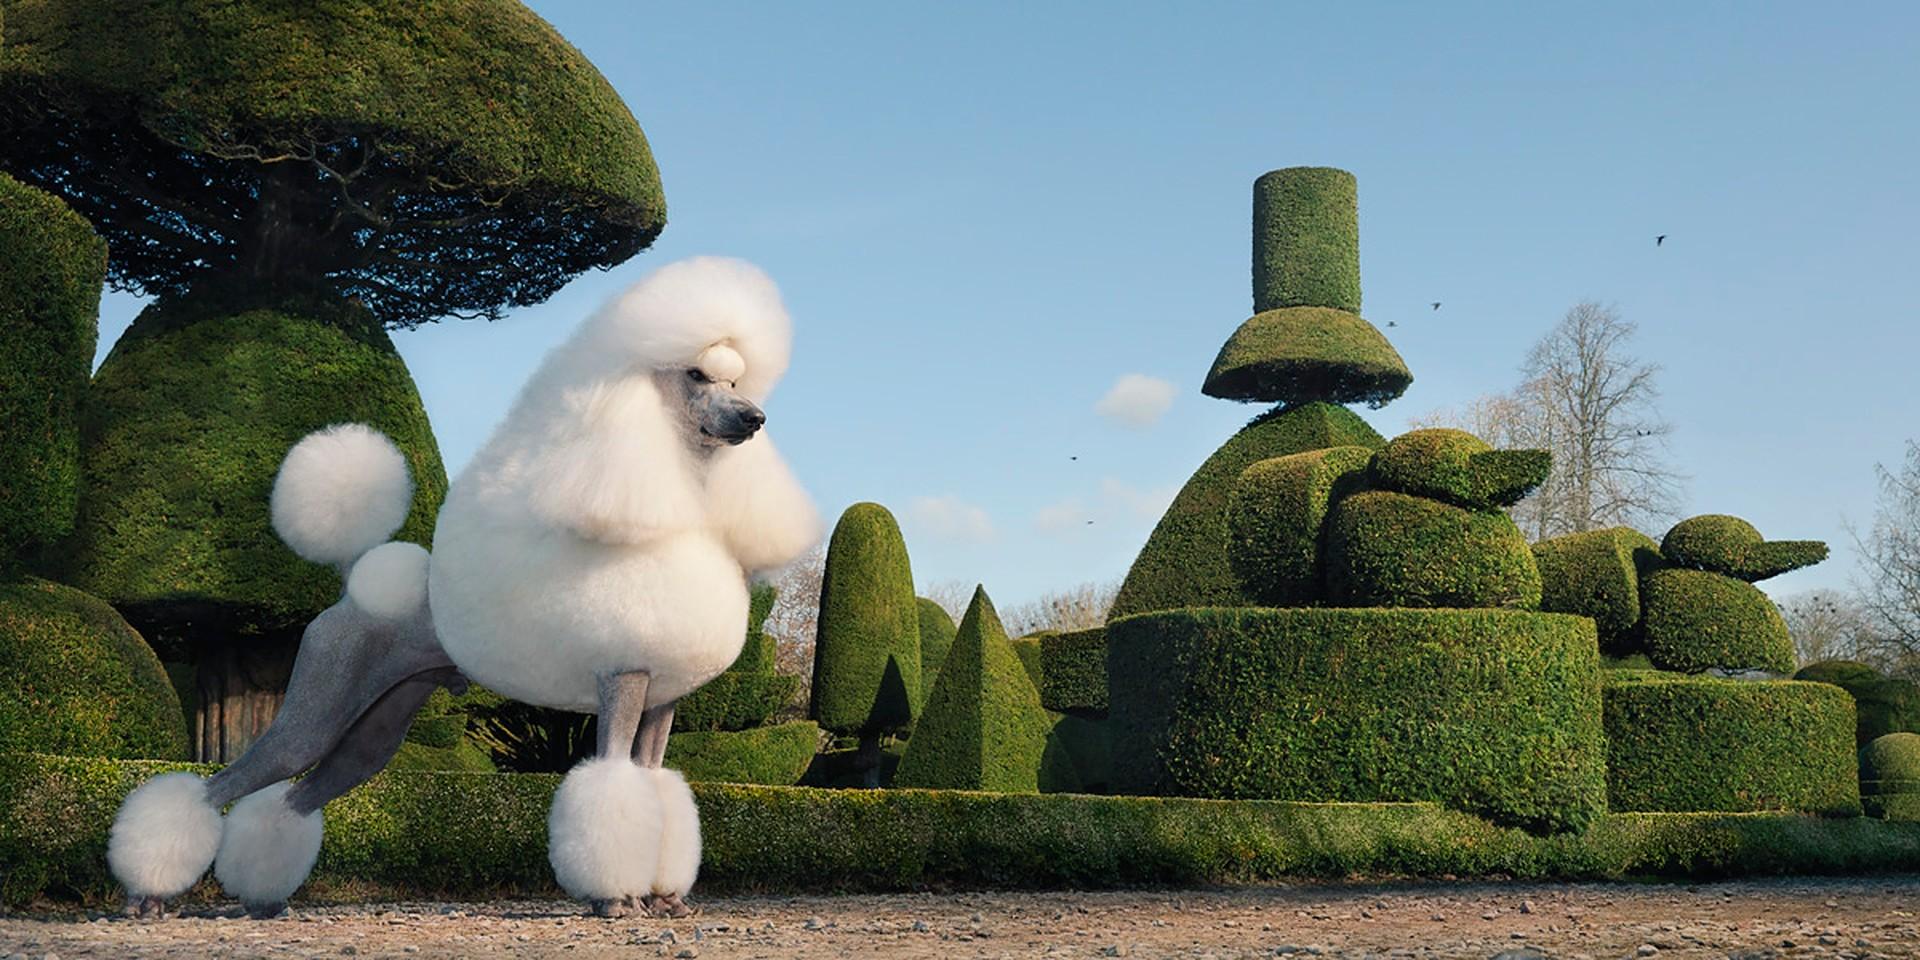 Topiary - Tim Flach, Animal Photography, Dogs, Contemporary British Art, Gardens